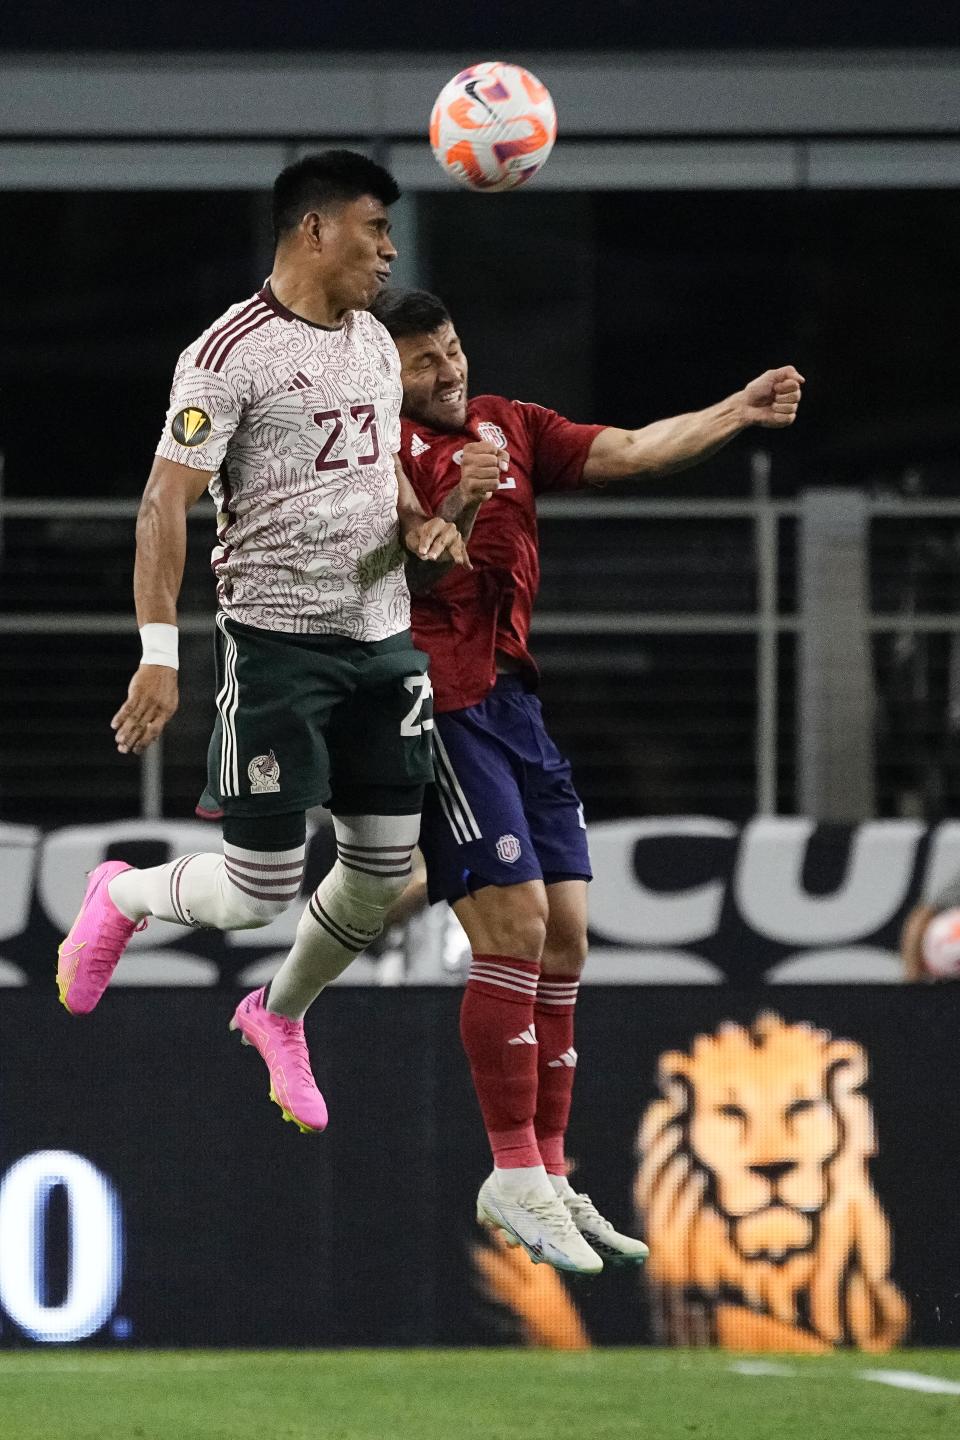 Mexico defender Jesús Gallardo (23) and Costa Rica defender Jefry Valverde go for a head ball during the first half of a CONCACAF Gold Cup soccer quarterfinal Saturday, July 8, 2023, in Arlington, Texas. (AP Photo/Sam Hodde)